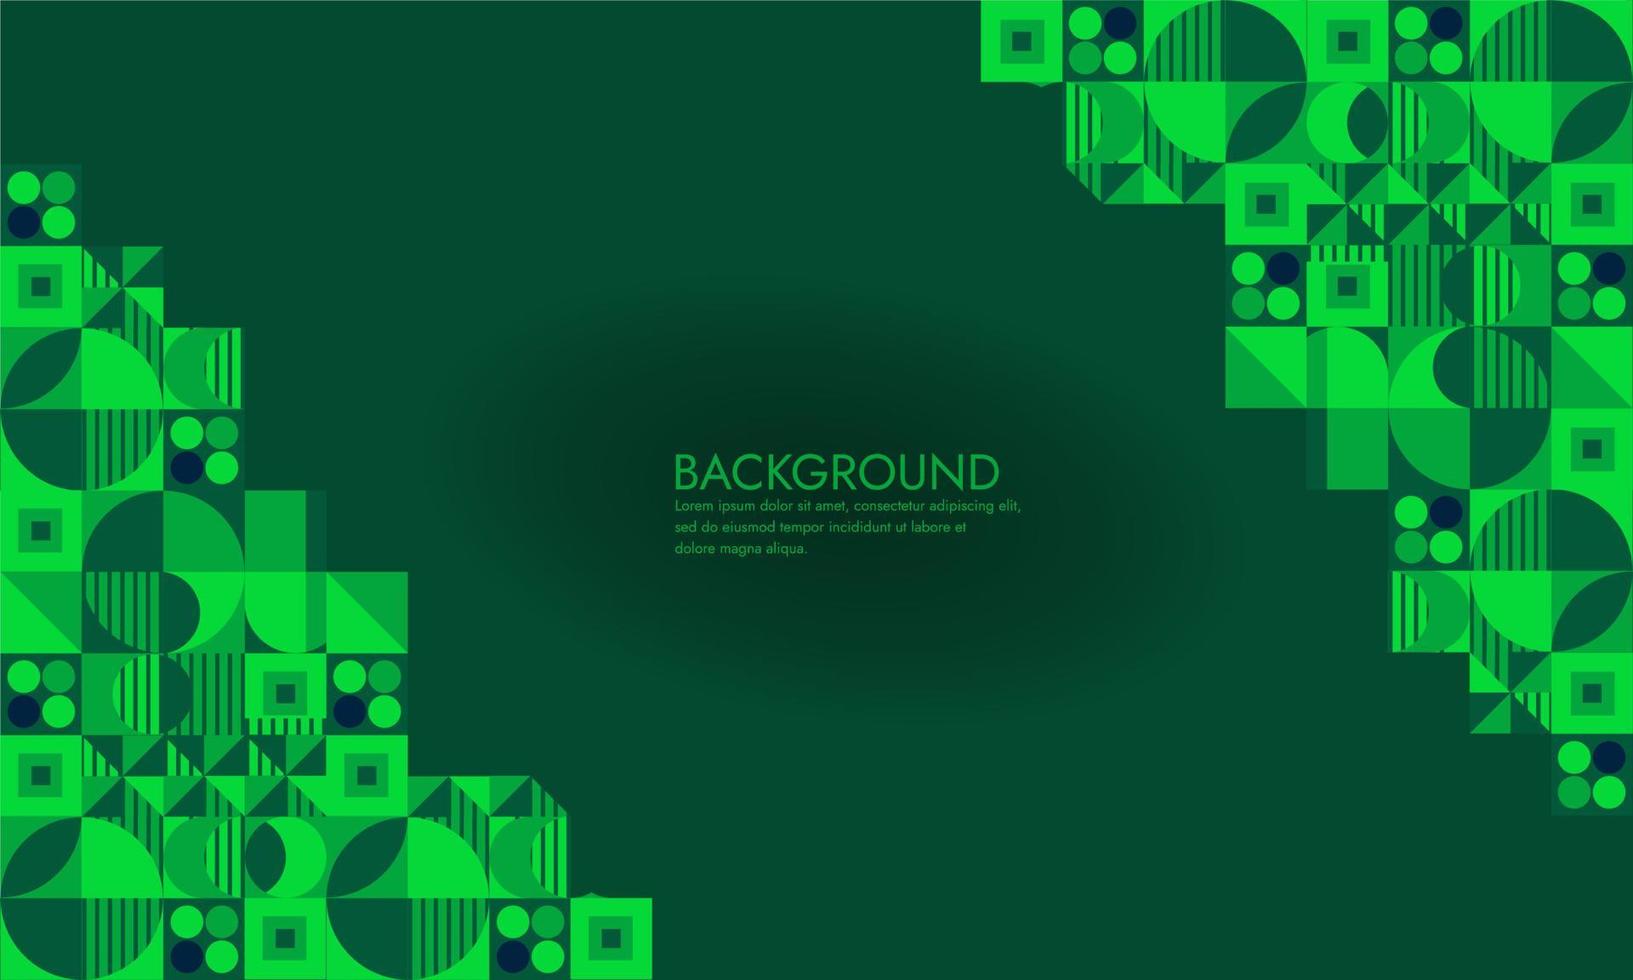 Geometric Abstract Backgrounds Design. Composition of simple geometric shapes on a green background. For use in Presentation, Flyer and Leaflet, Cards, Landing, Website Design. Vector illustration.